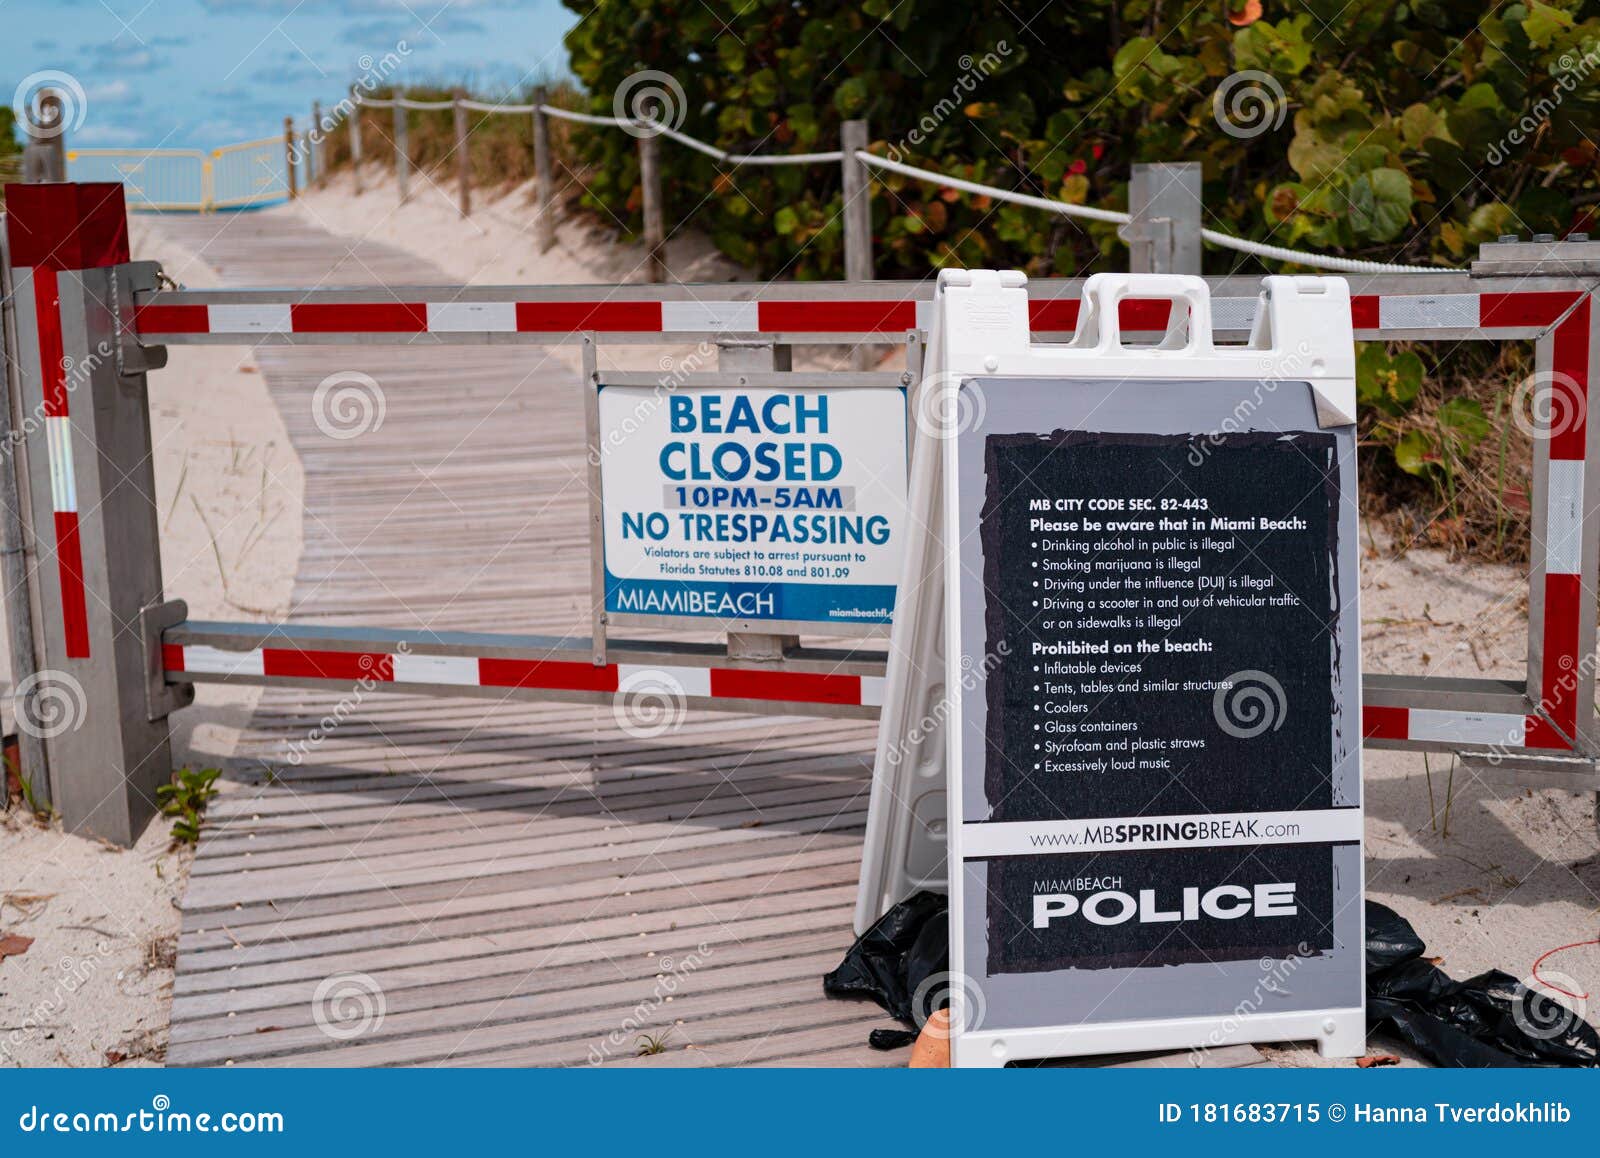 Miami Beach Closed Sign Police Restrictions In Florida Us Covid